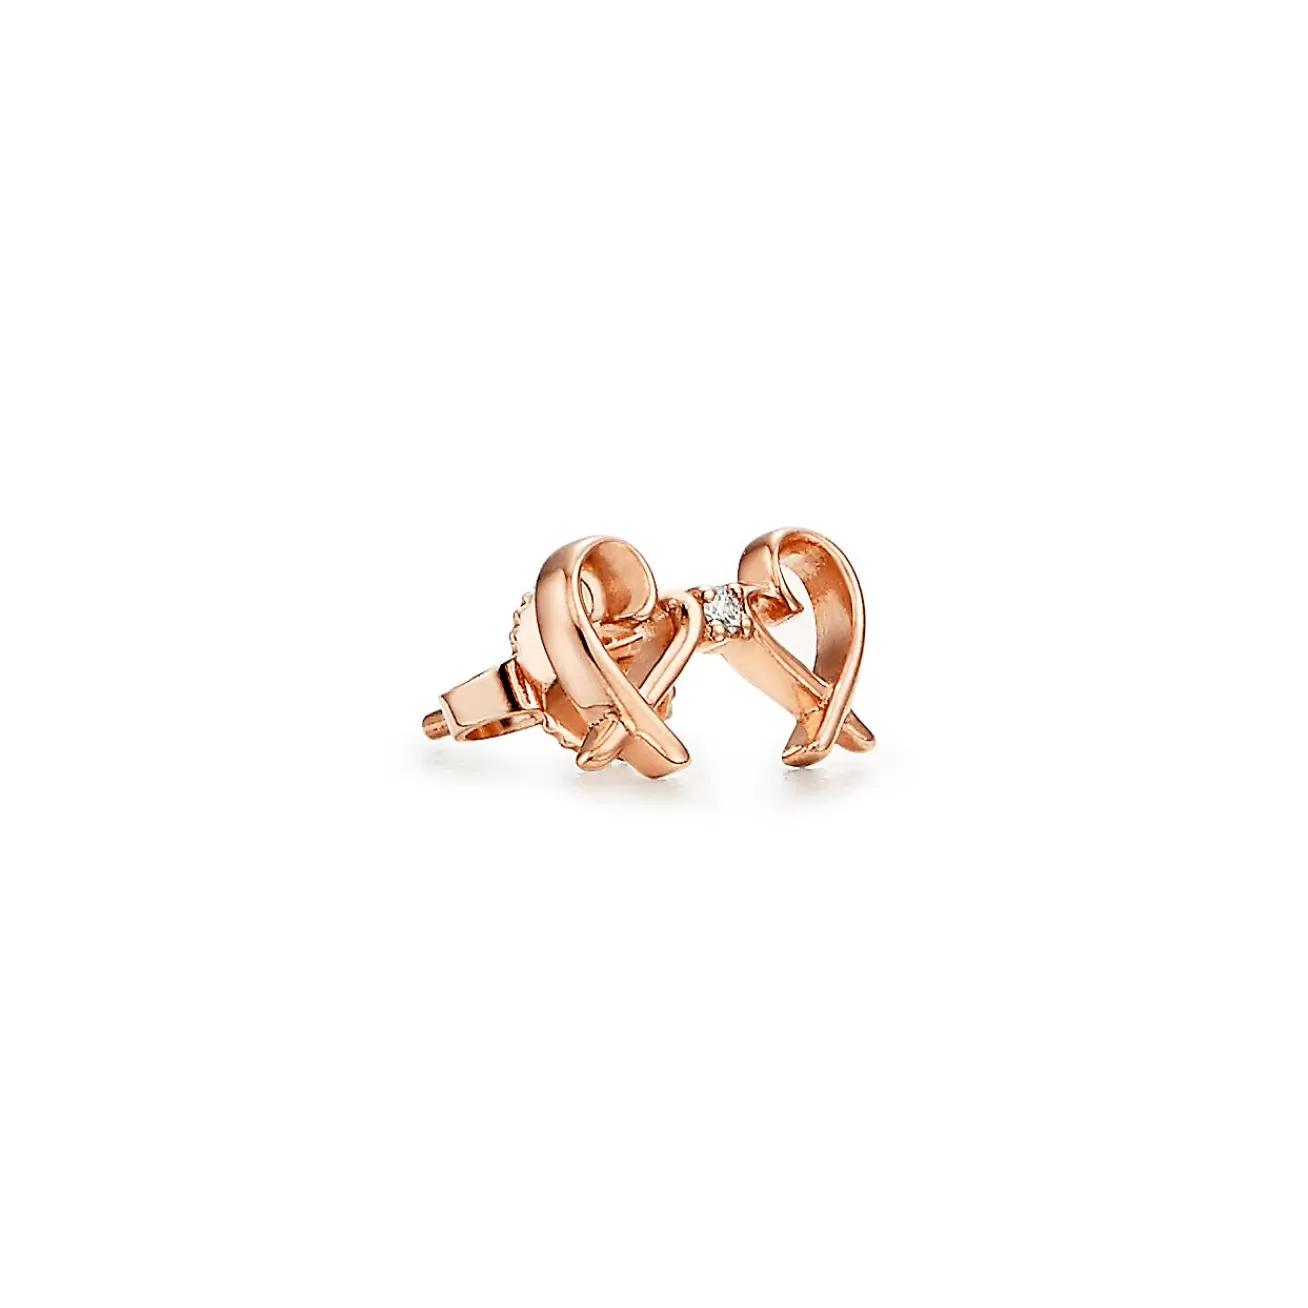 Tiffany & Co. Paloma Picasso® Double Loving Heart earrings in 18k rose gold with diamonds. | ^ Earrings | Rose Gold Jewelry